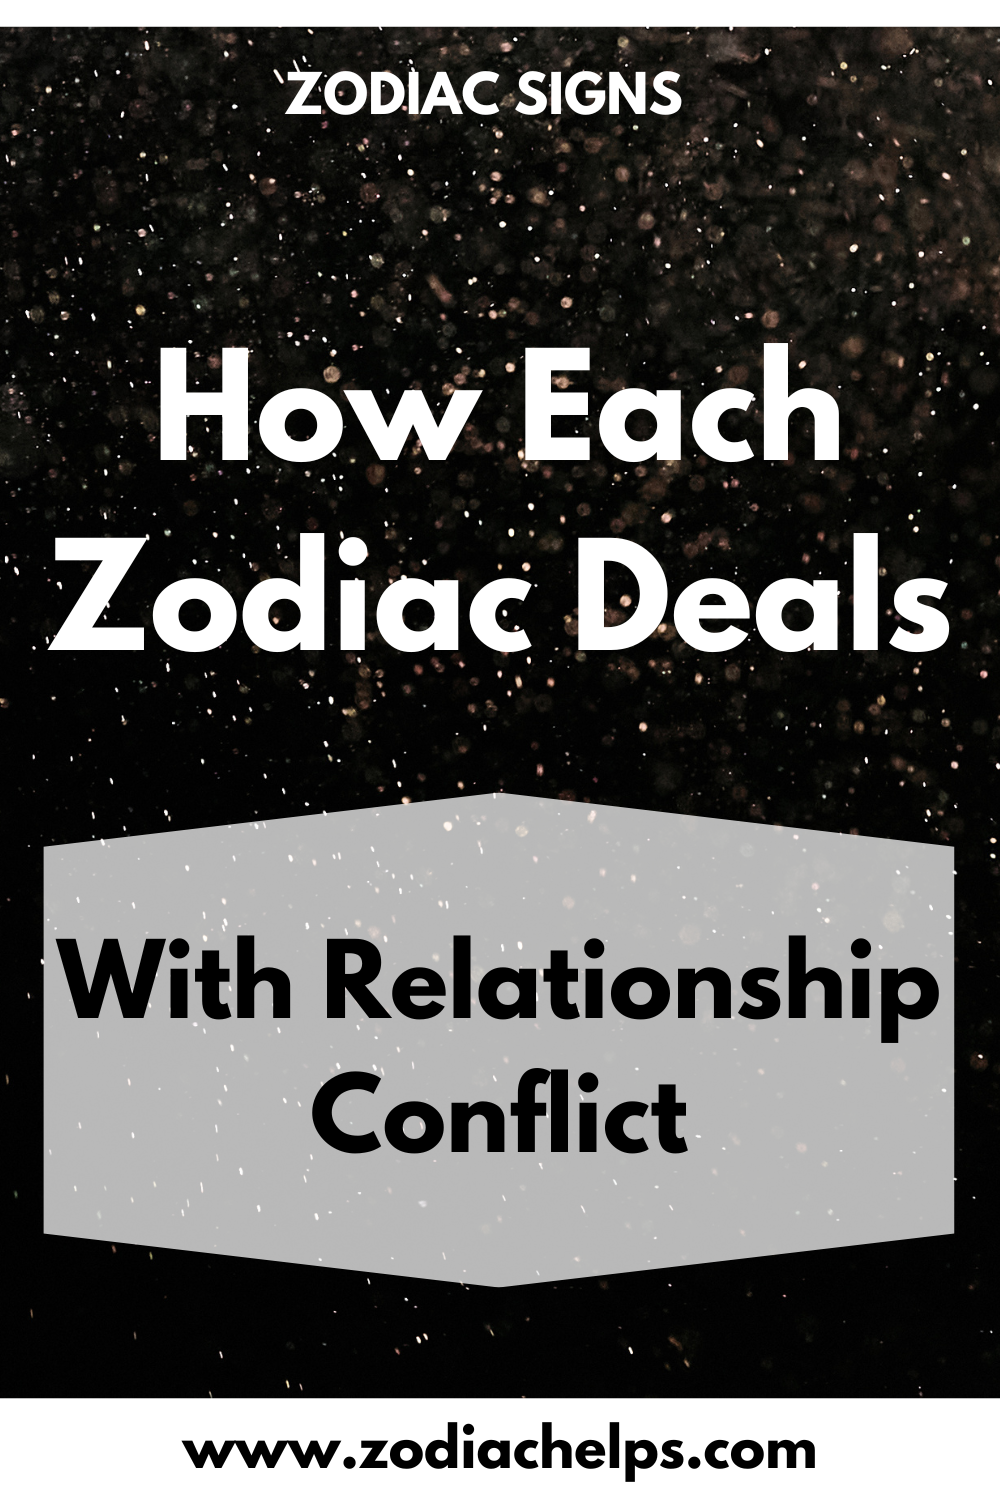 How Each Zodiac Deals With Relationship Conflict